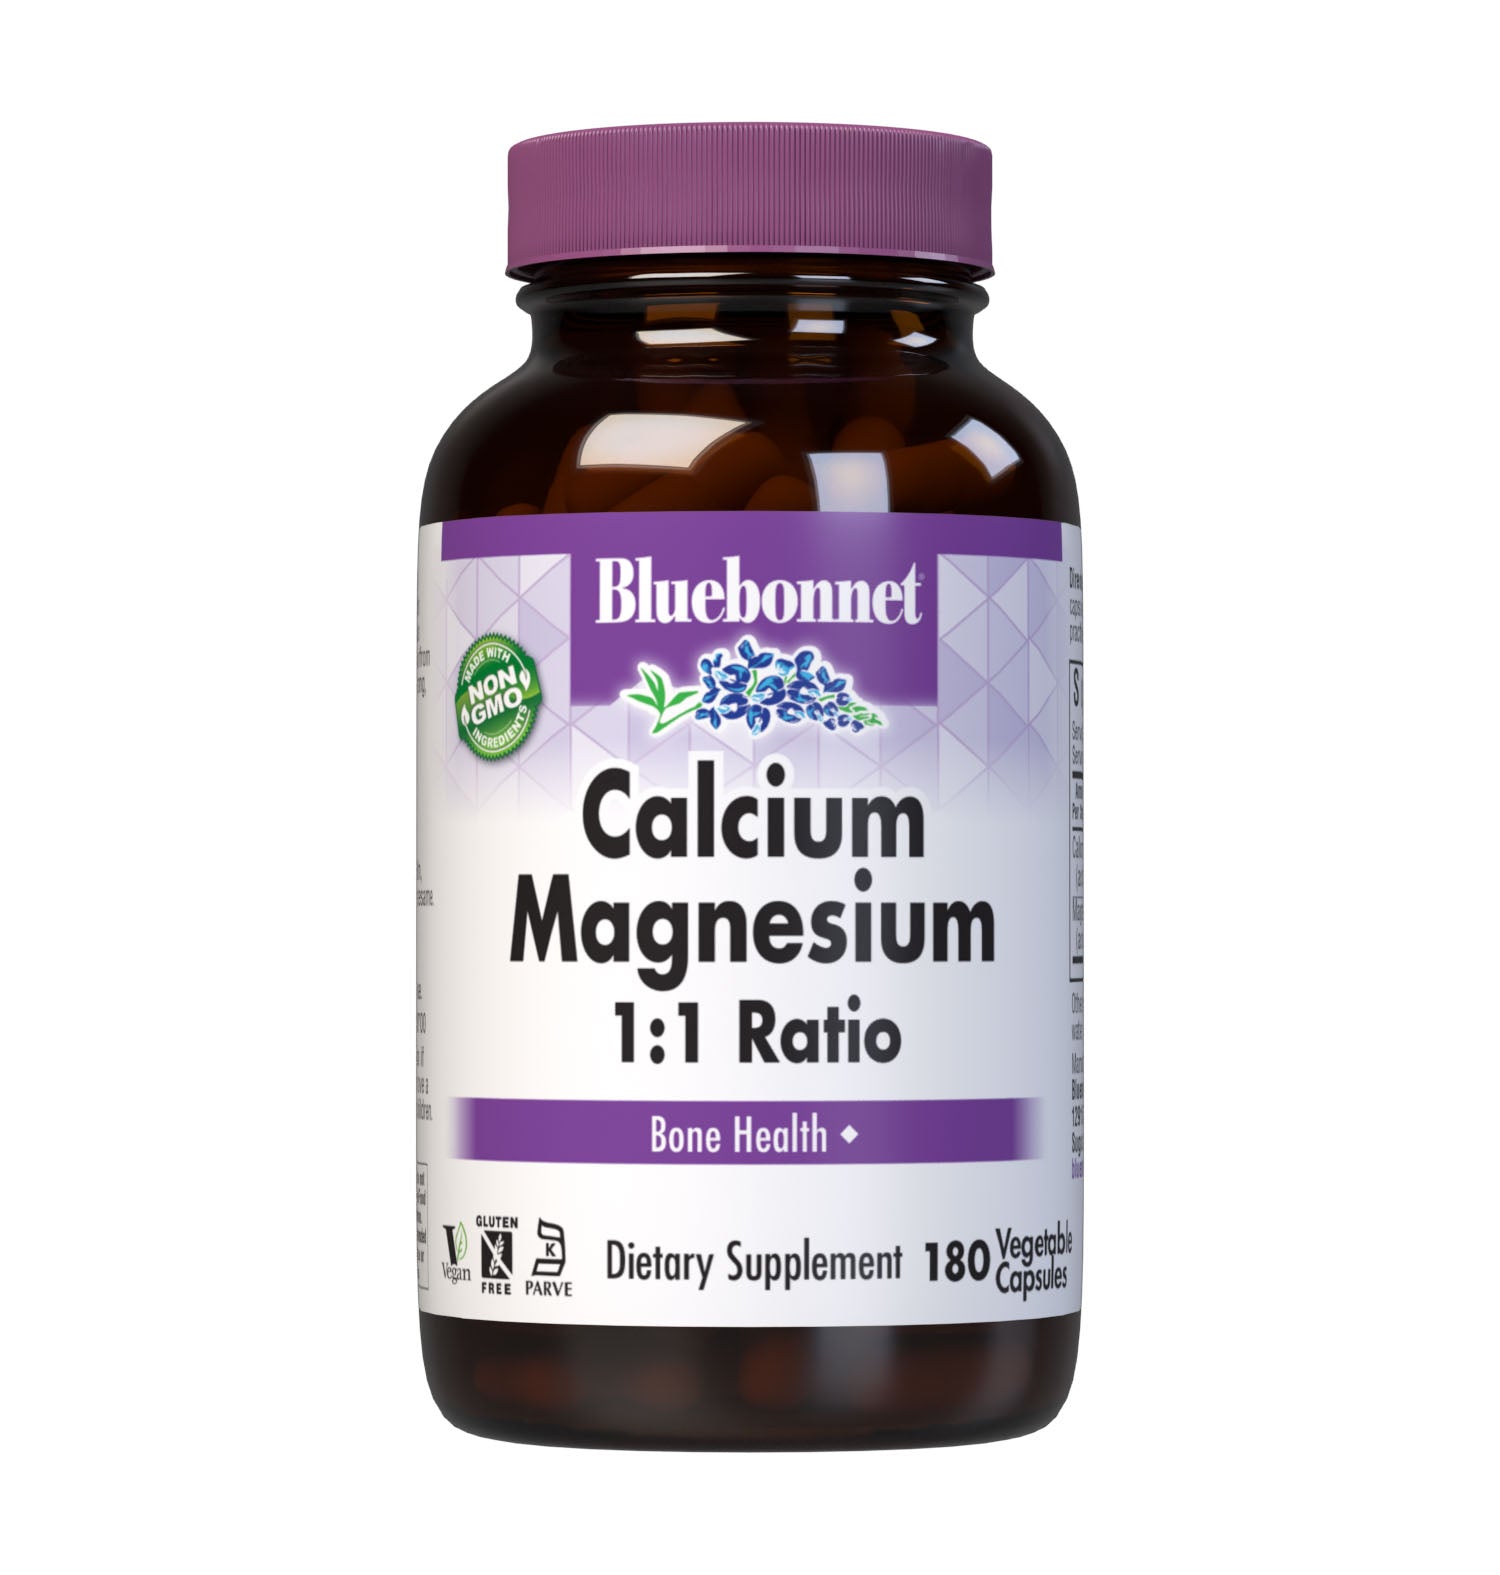 Bluebonnet's Calcium Magnesium 1:1 180 Vegetable Capsules are formulated with a 1:1 ratio of calcium in a chelate of calcium citrate and malate, along with magnesium from fully reacted magnesium aspartate for strong, healthy bones. #size_180 count